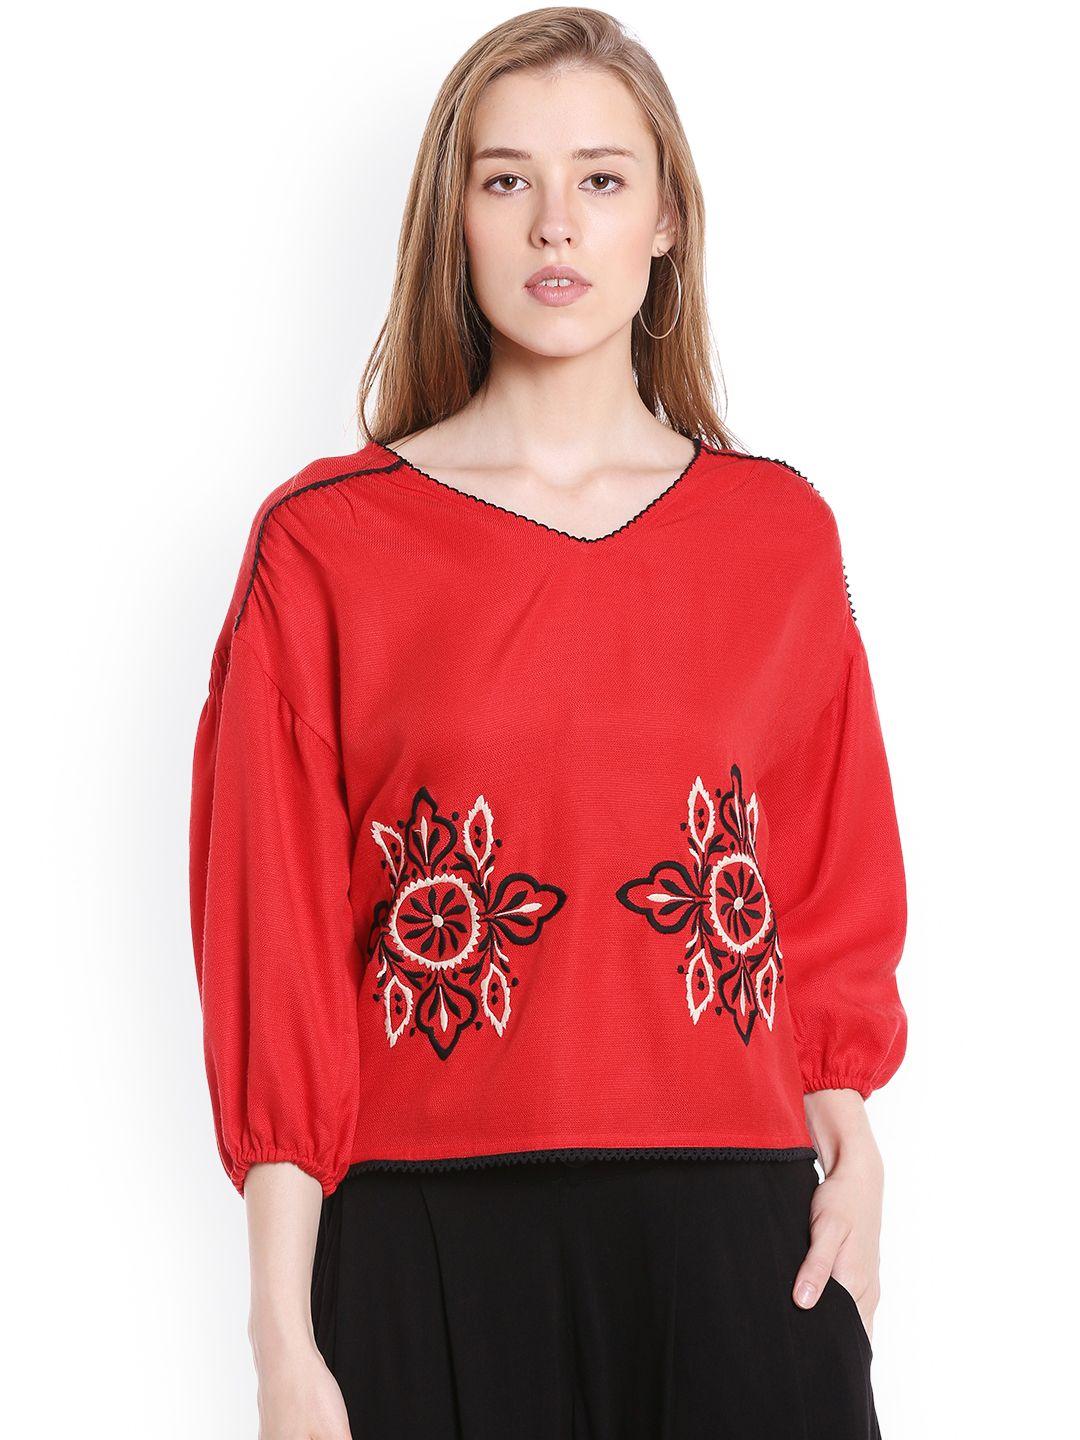 fusion-beats-women-red-embroidered-top